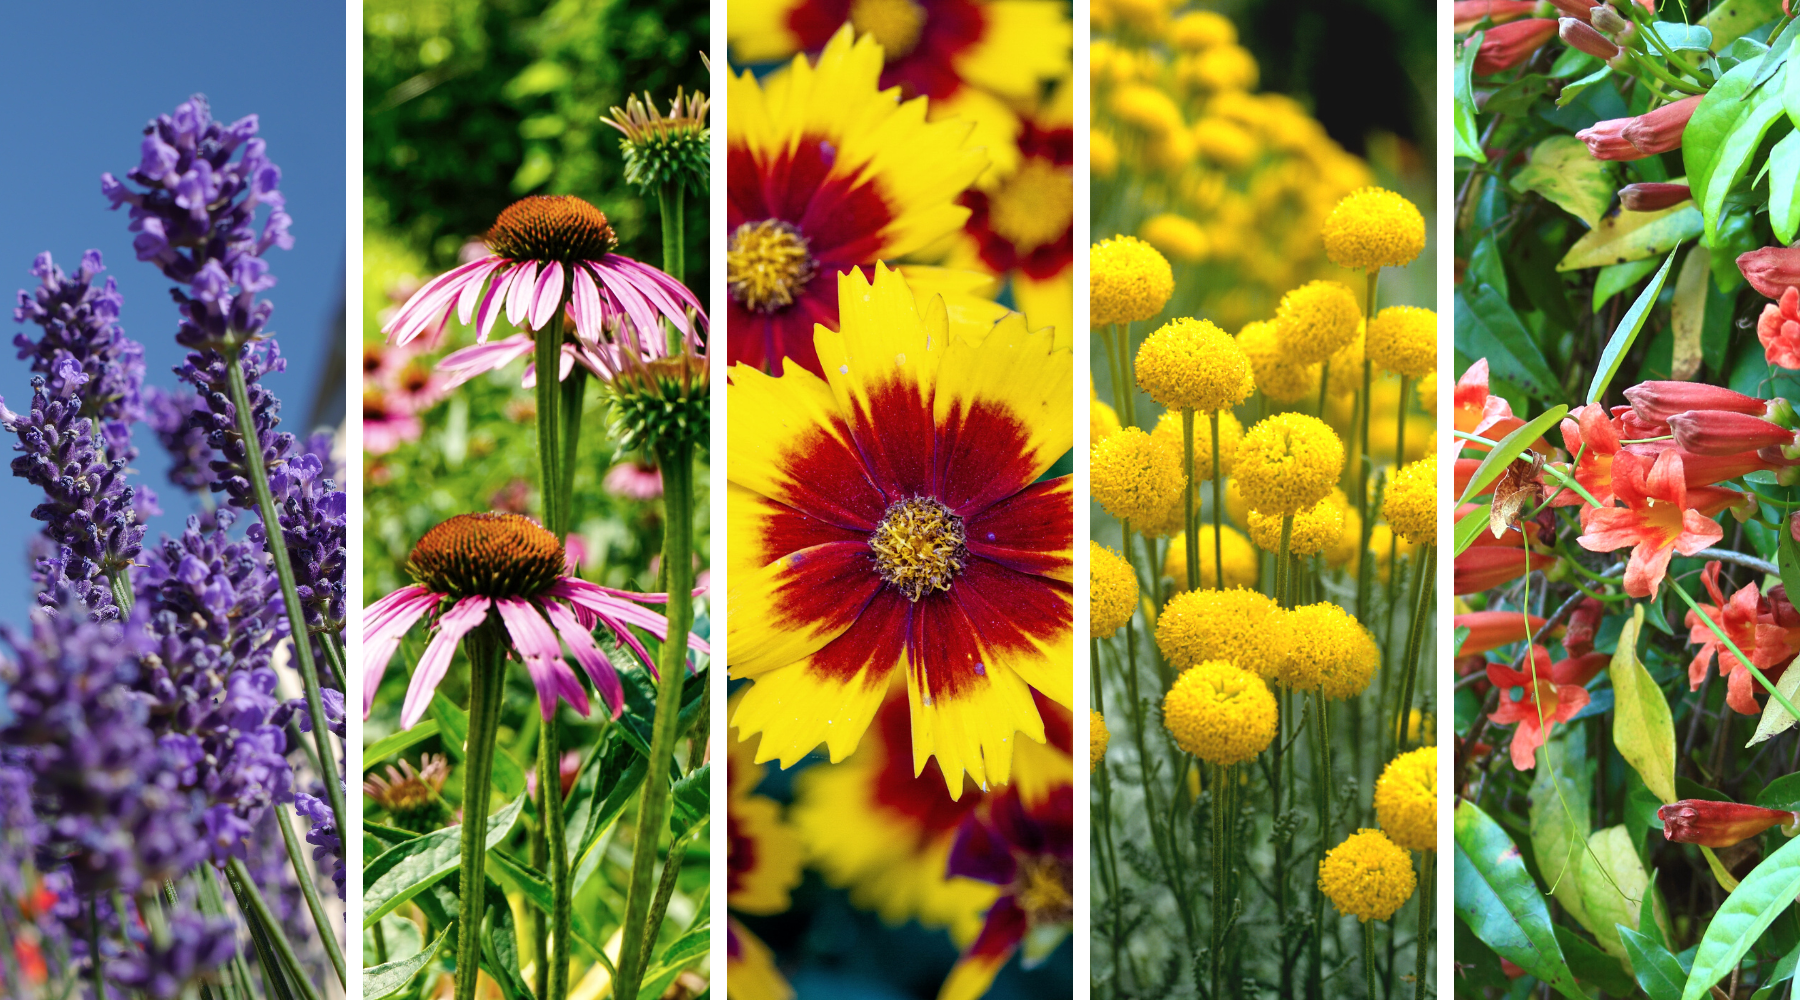 Collage of five flowers: Lavender, Echinacea, Coreopsis, Santolina, and Crossvine